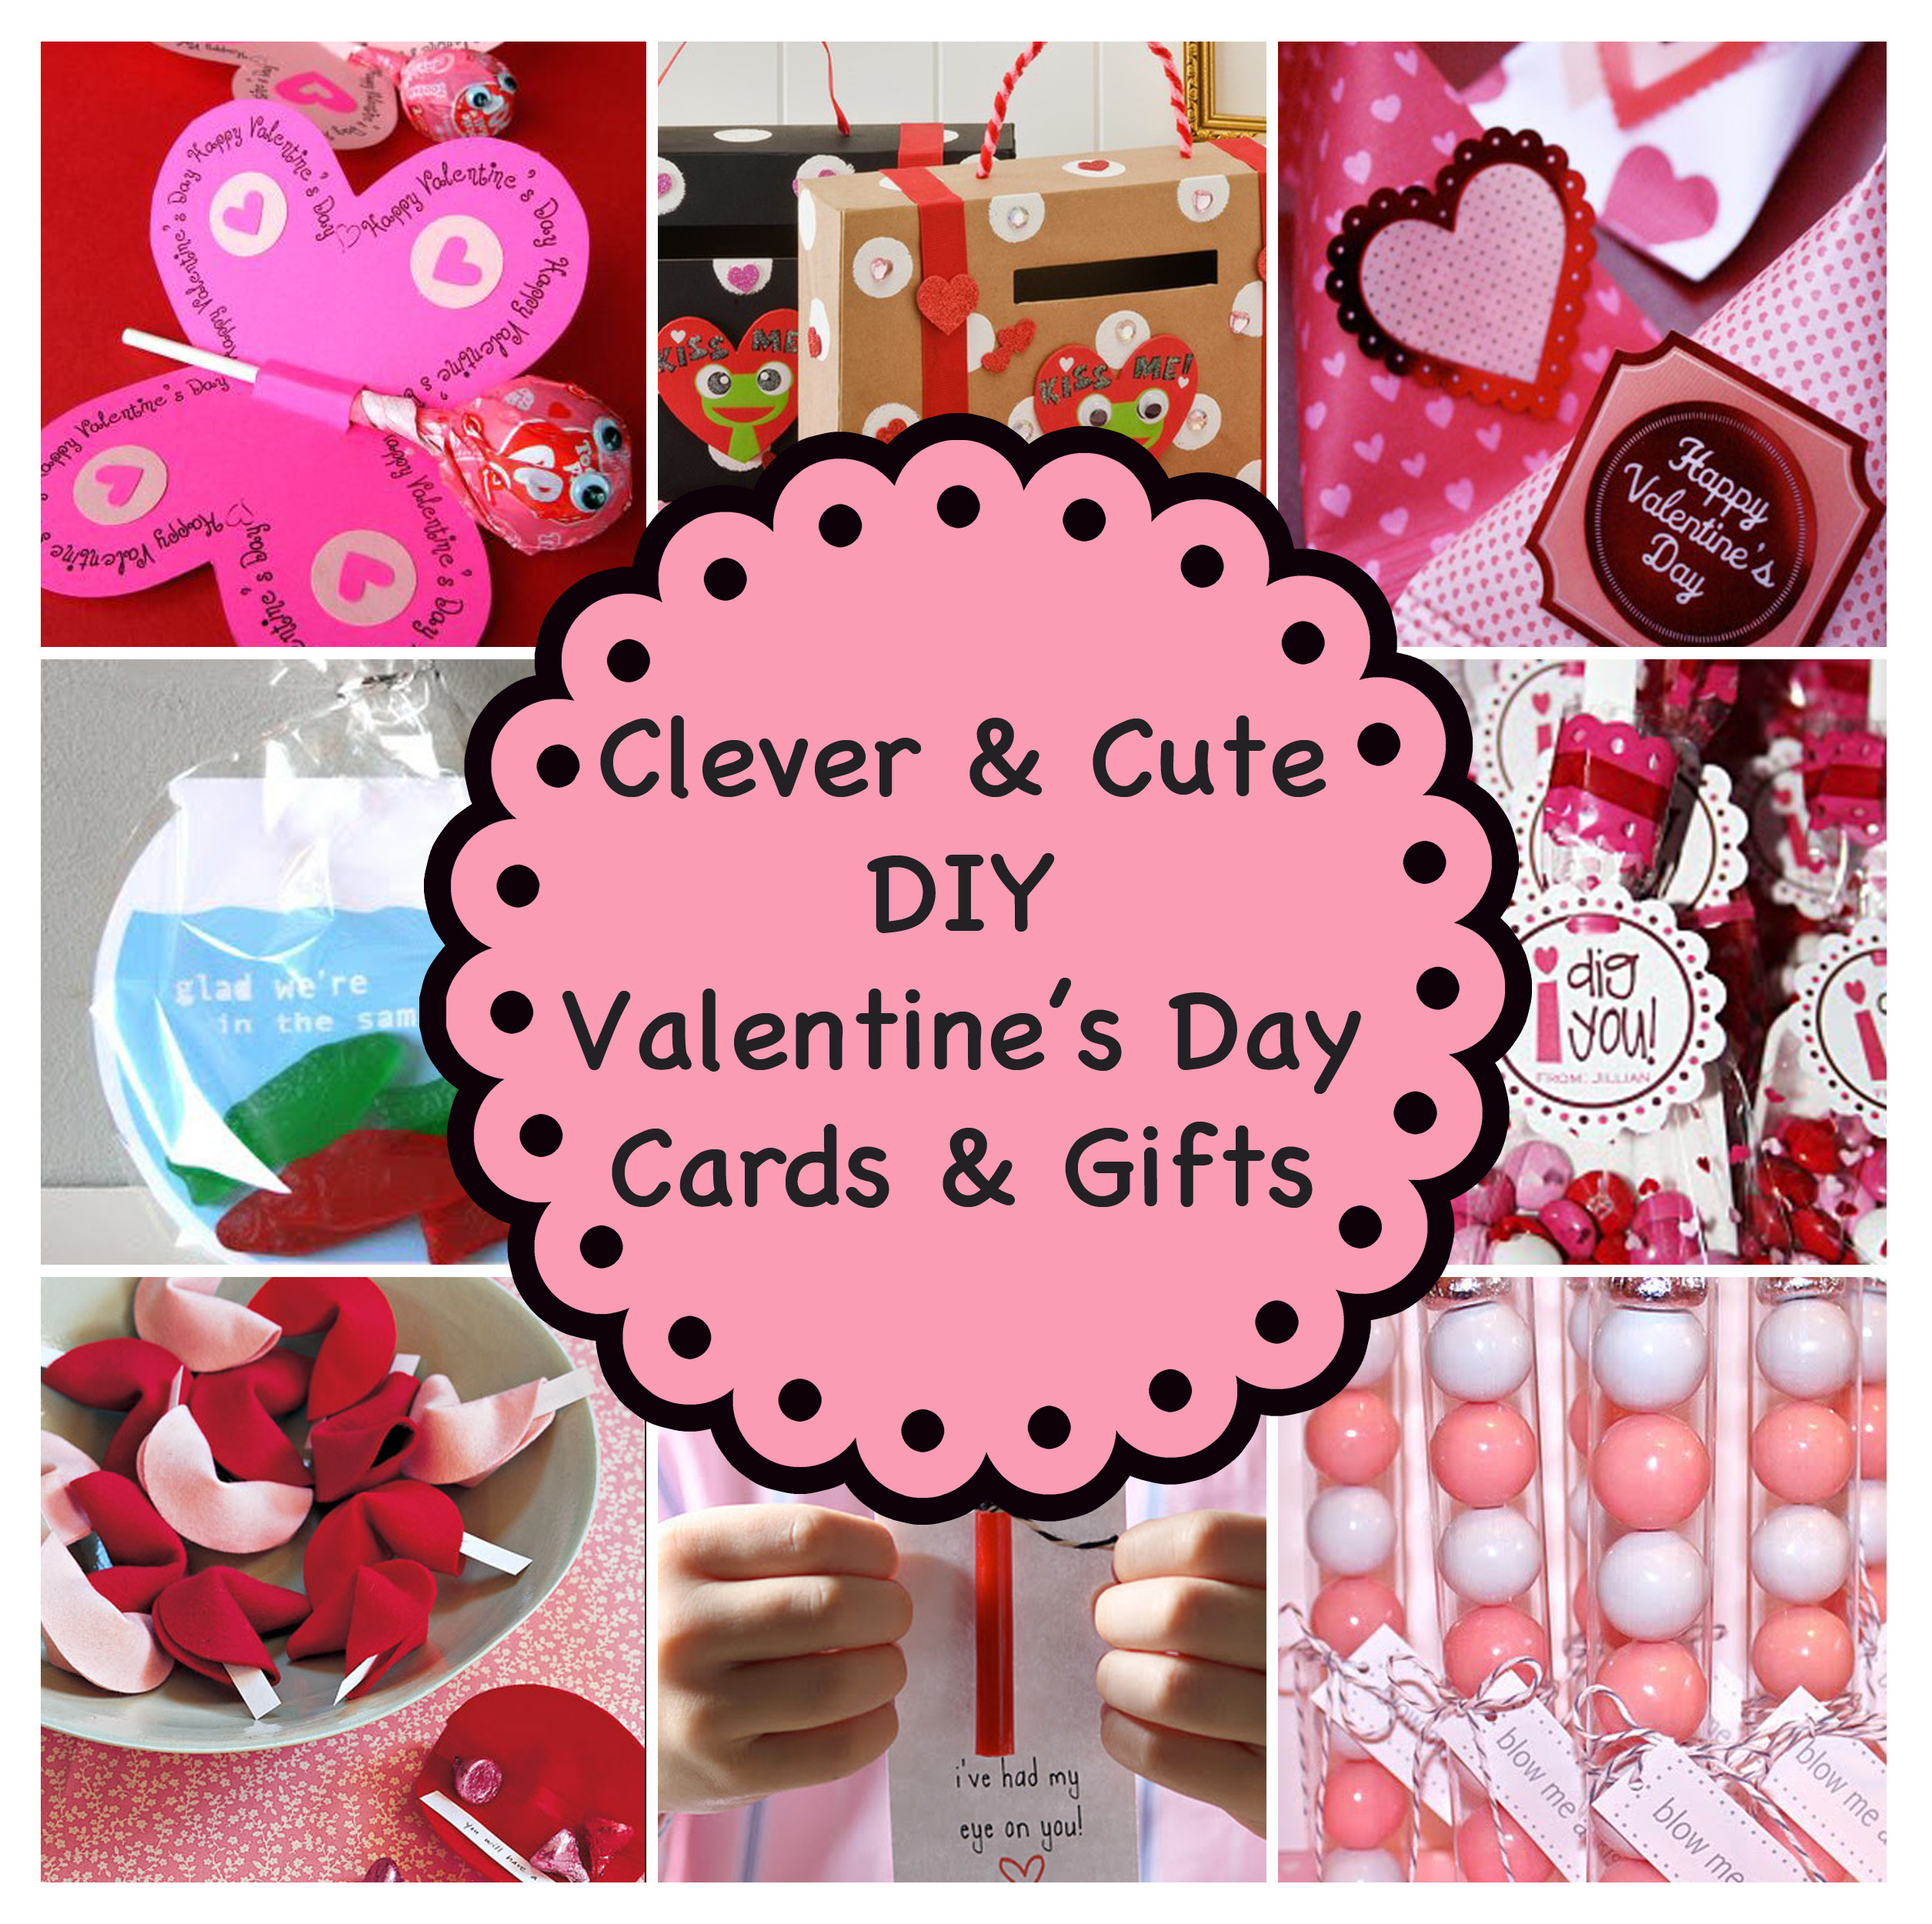 Valentine Cute Gift Ideas
 Clever and Cute DIY Valentine’s Day Cards & Gifts